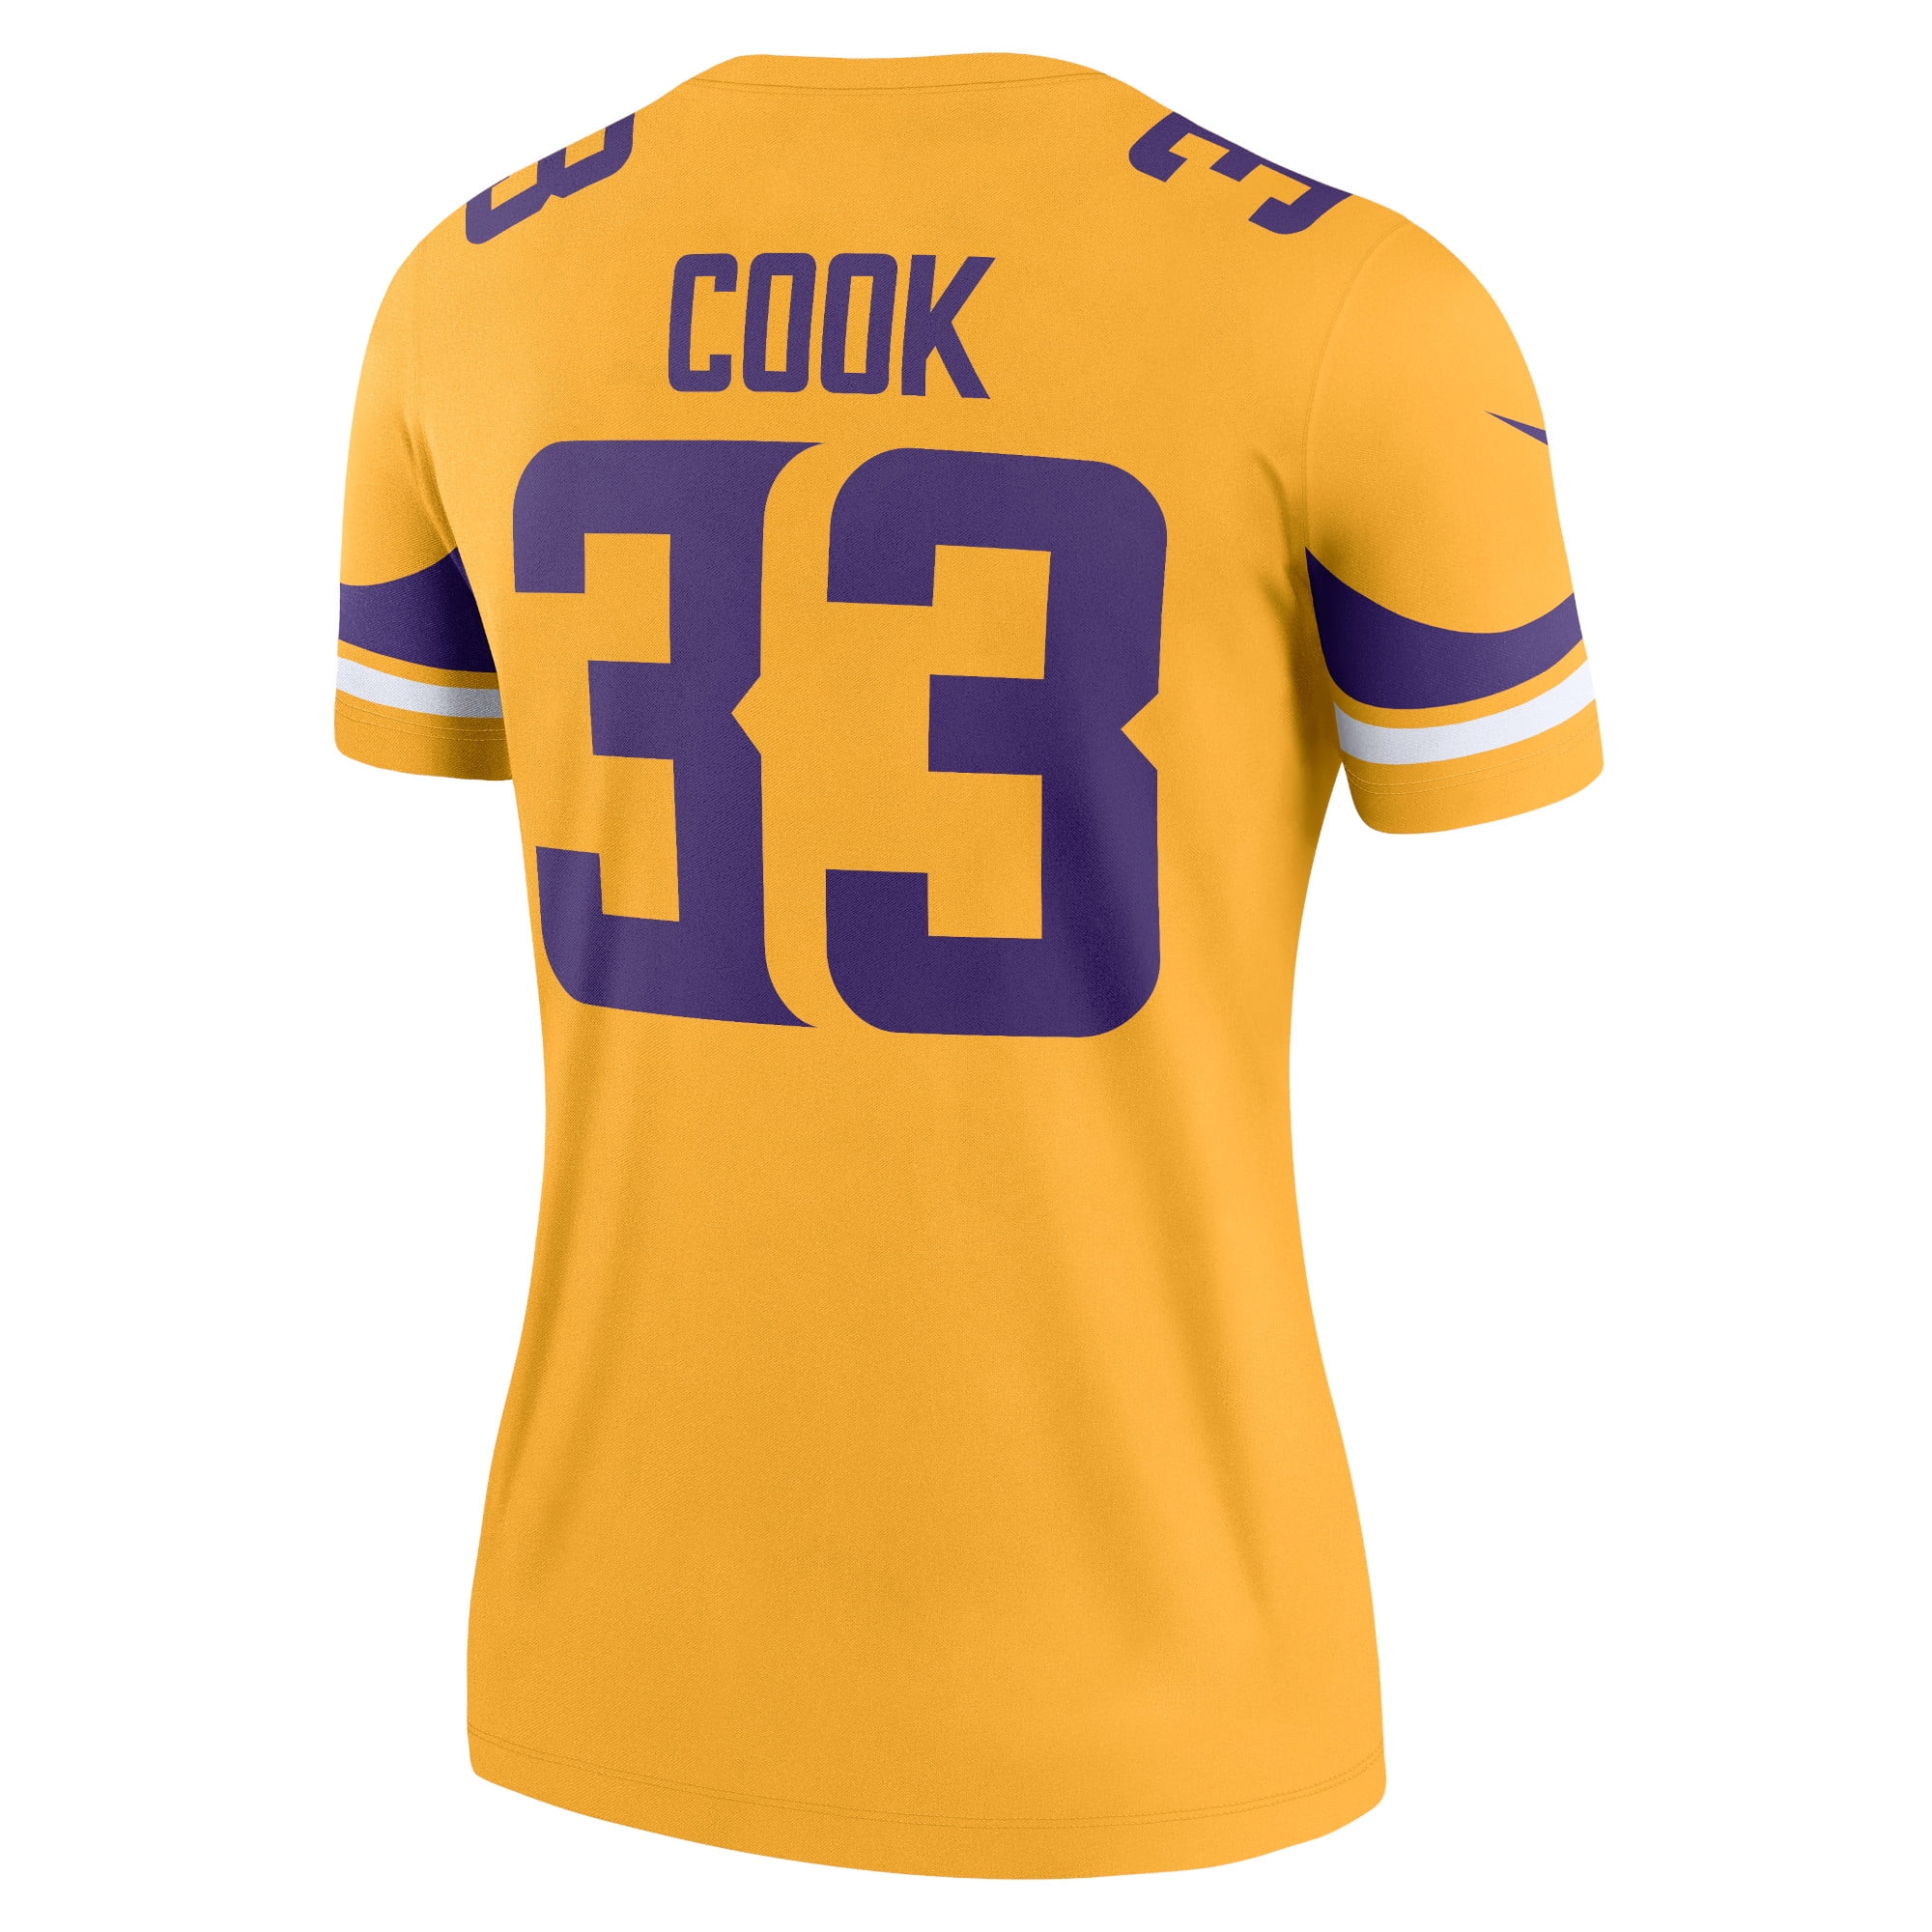 vikings inverted jersey